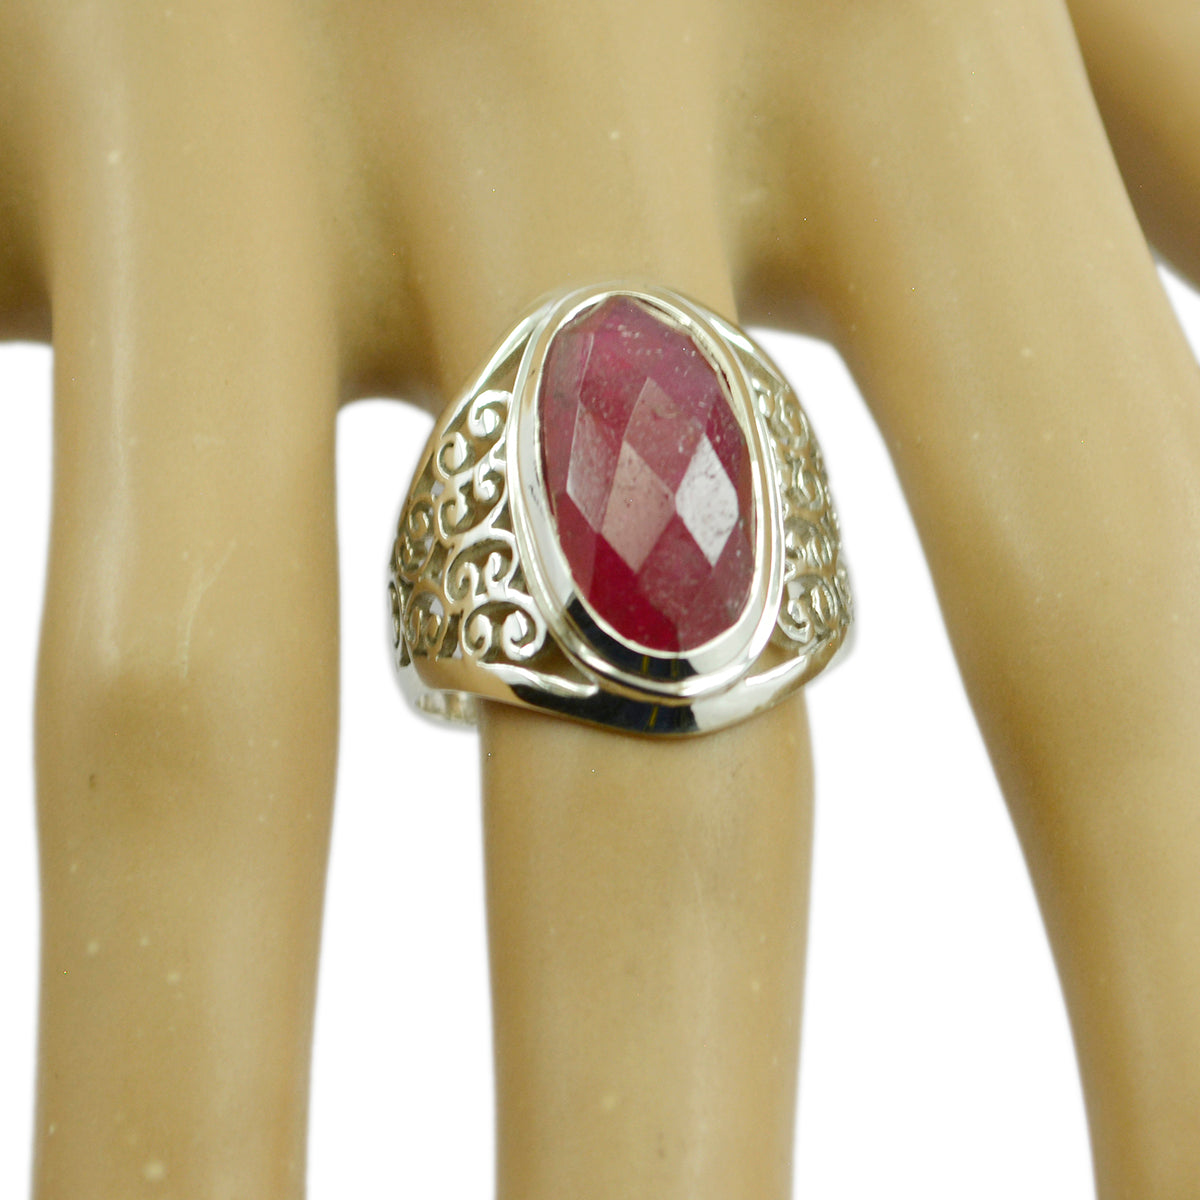 Pleasing Gemstones Indianruby Solid Silver Ring Jewelry Making Kit